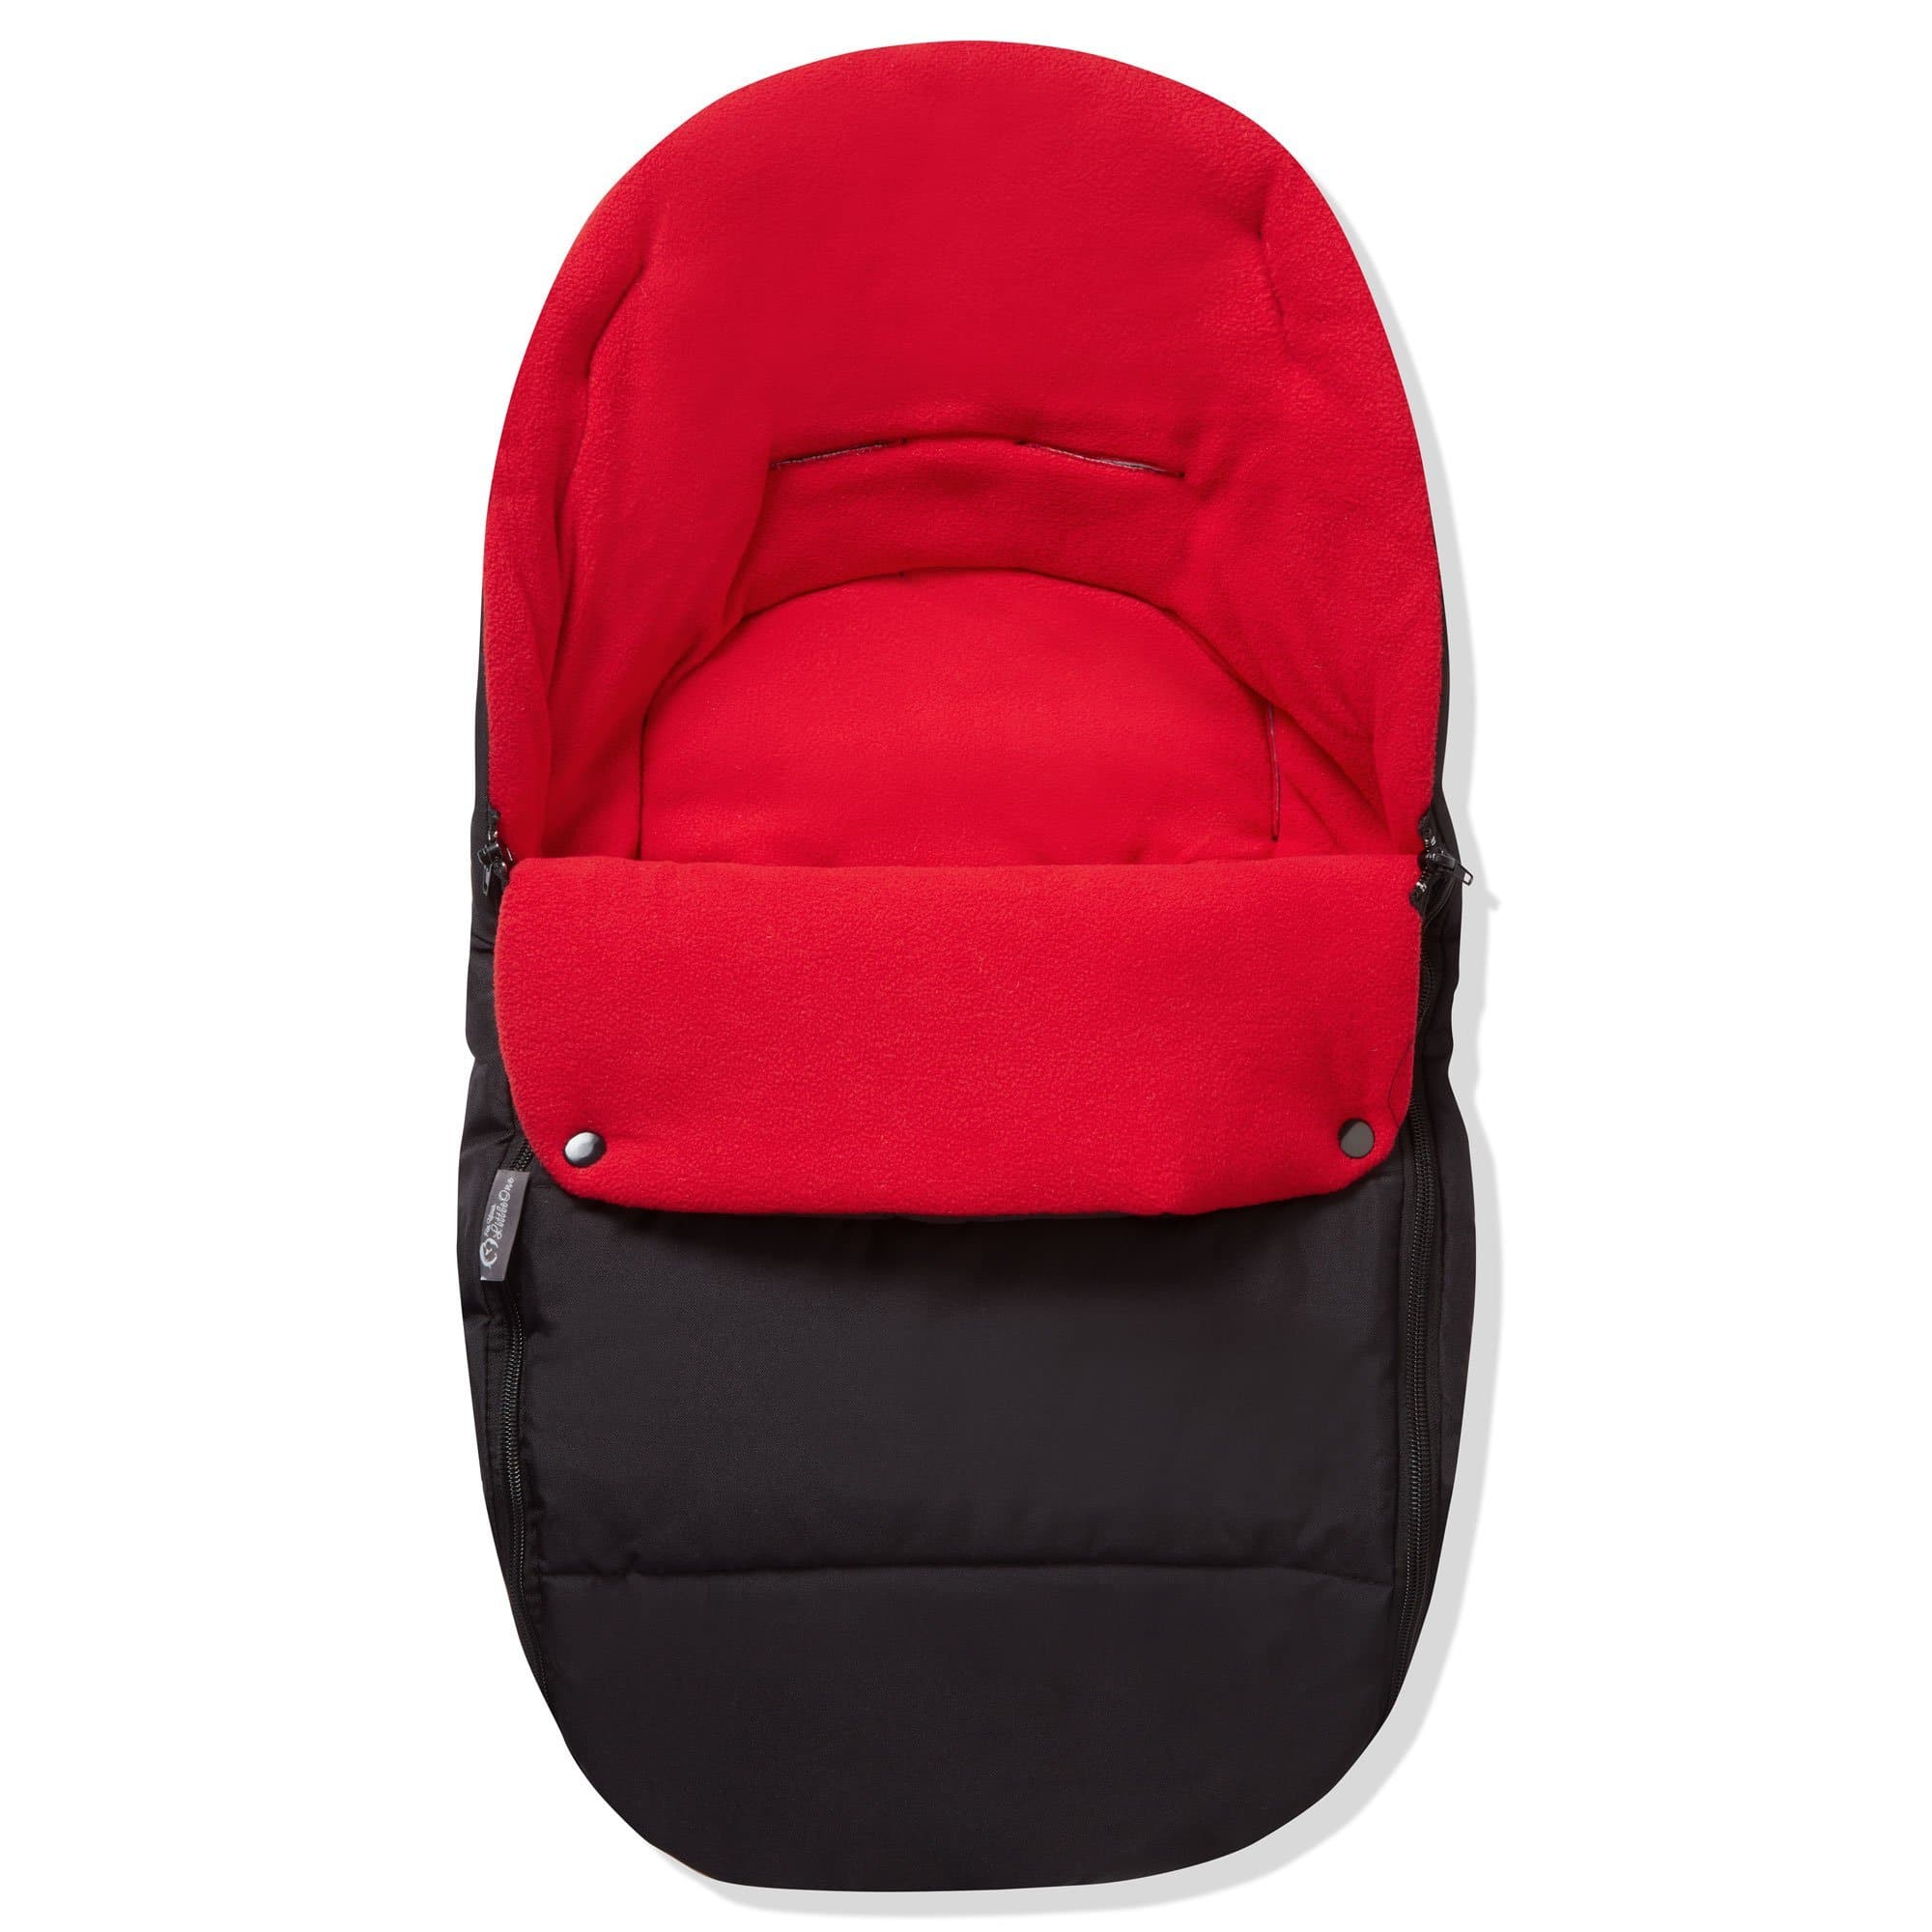 Premium Car Seat Footmuff / Cosy Toes Compatible with Mee-Go - Fire Red / Fits All Models | For Your Little One